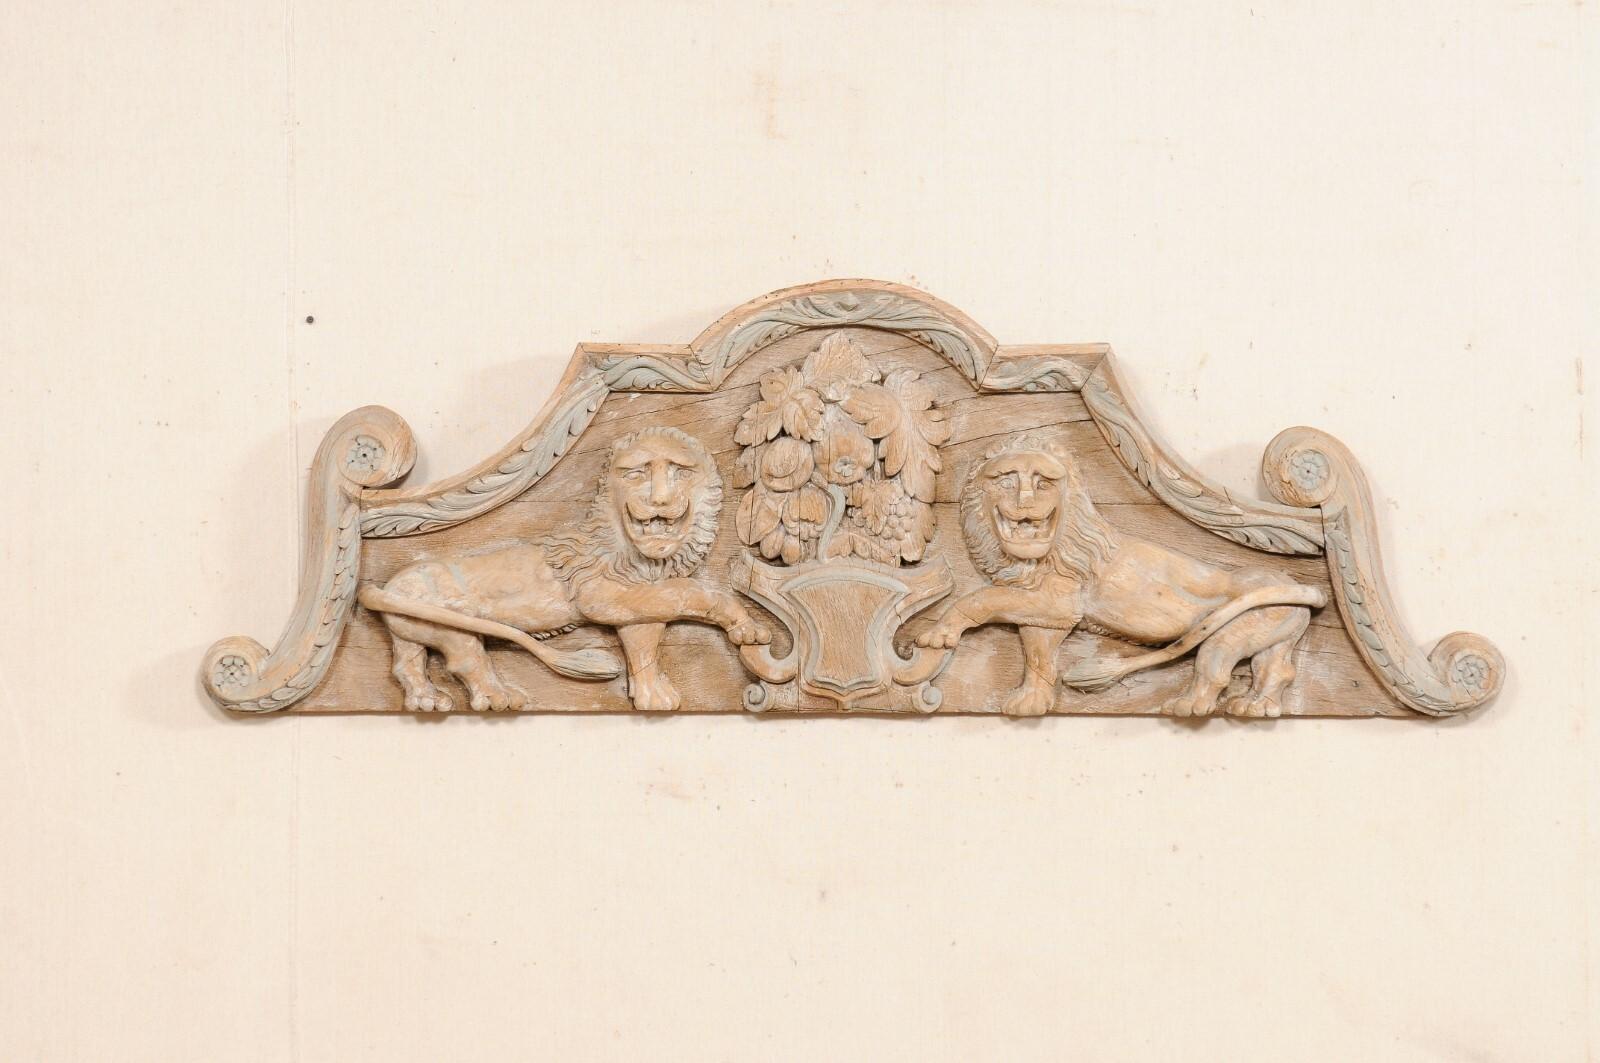 A French architectural carved wood plaque, in a lion motif, from the 19th century. This antique wall decoration from France has a pediment style design with arched top and lovely s-scrolled sides and a flat bottom. There is a heavily carved crest,